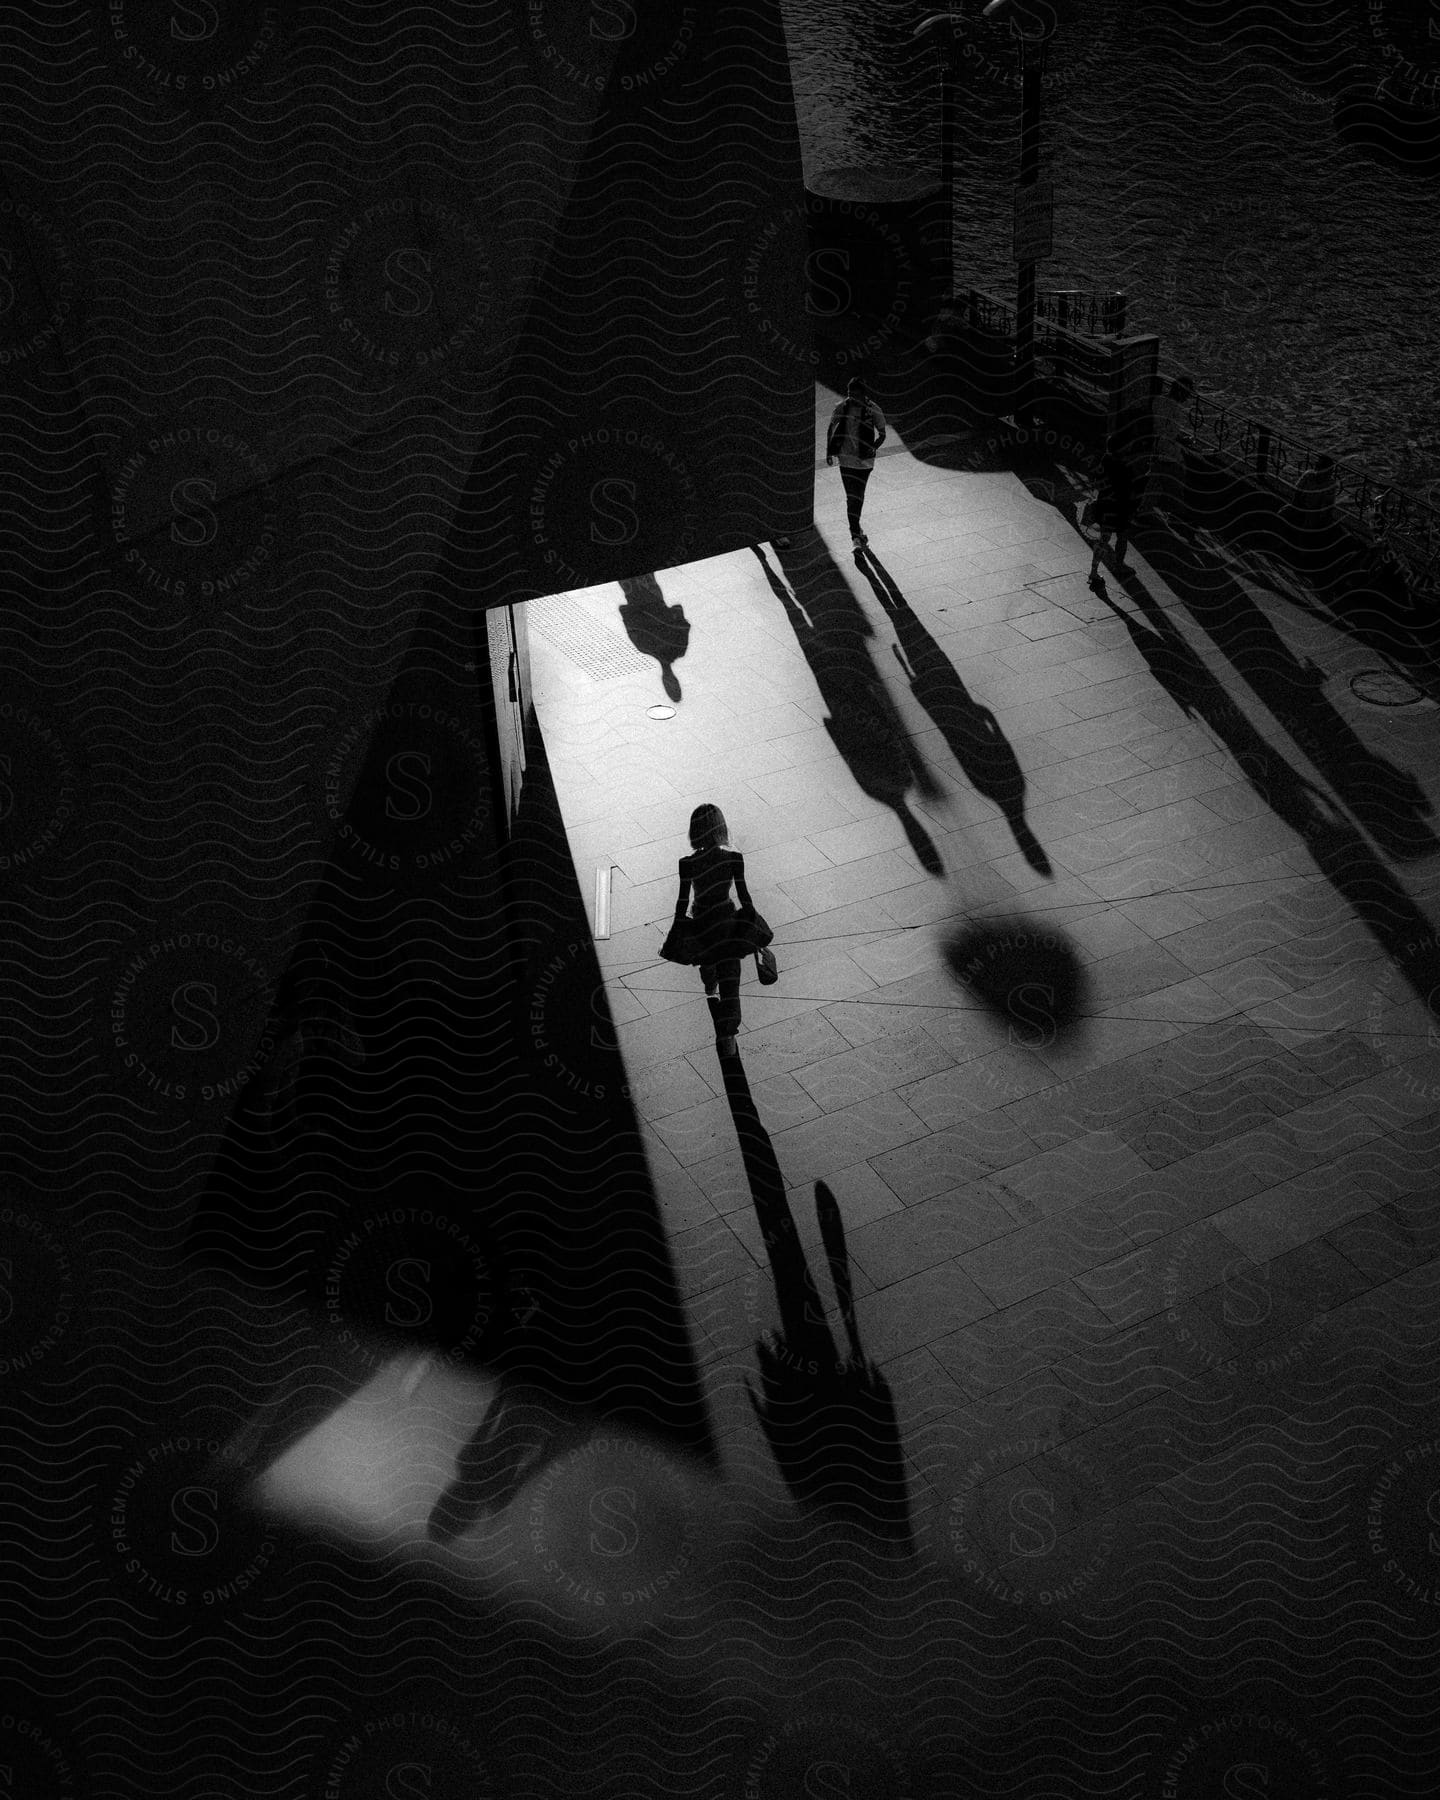 Pedestrians walking near a pier with only their shadows and silhouettes visible